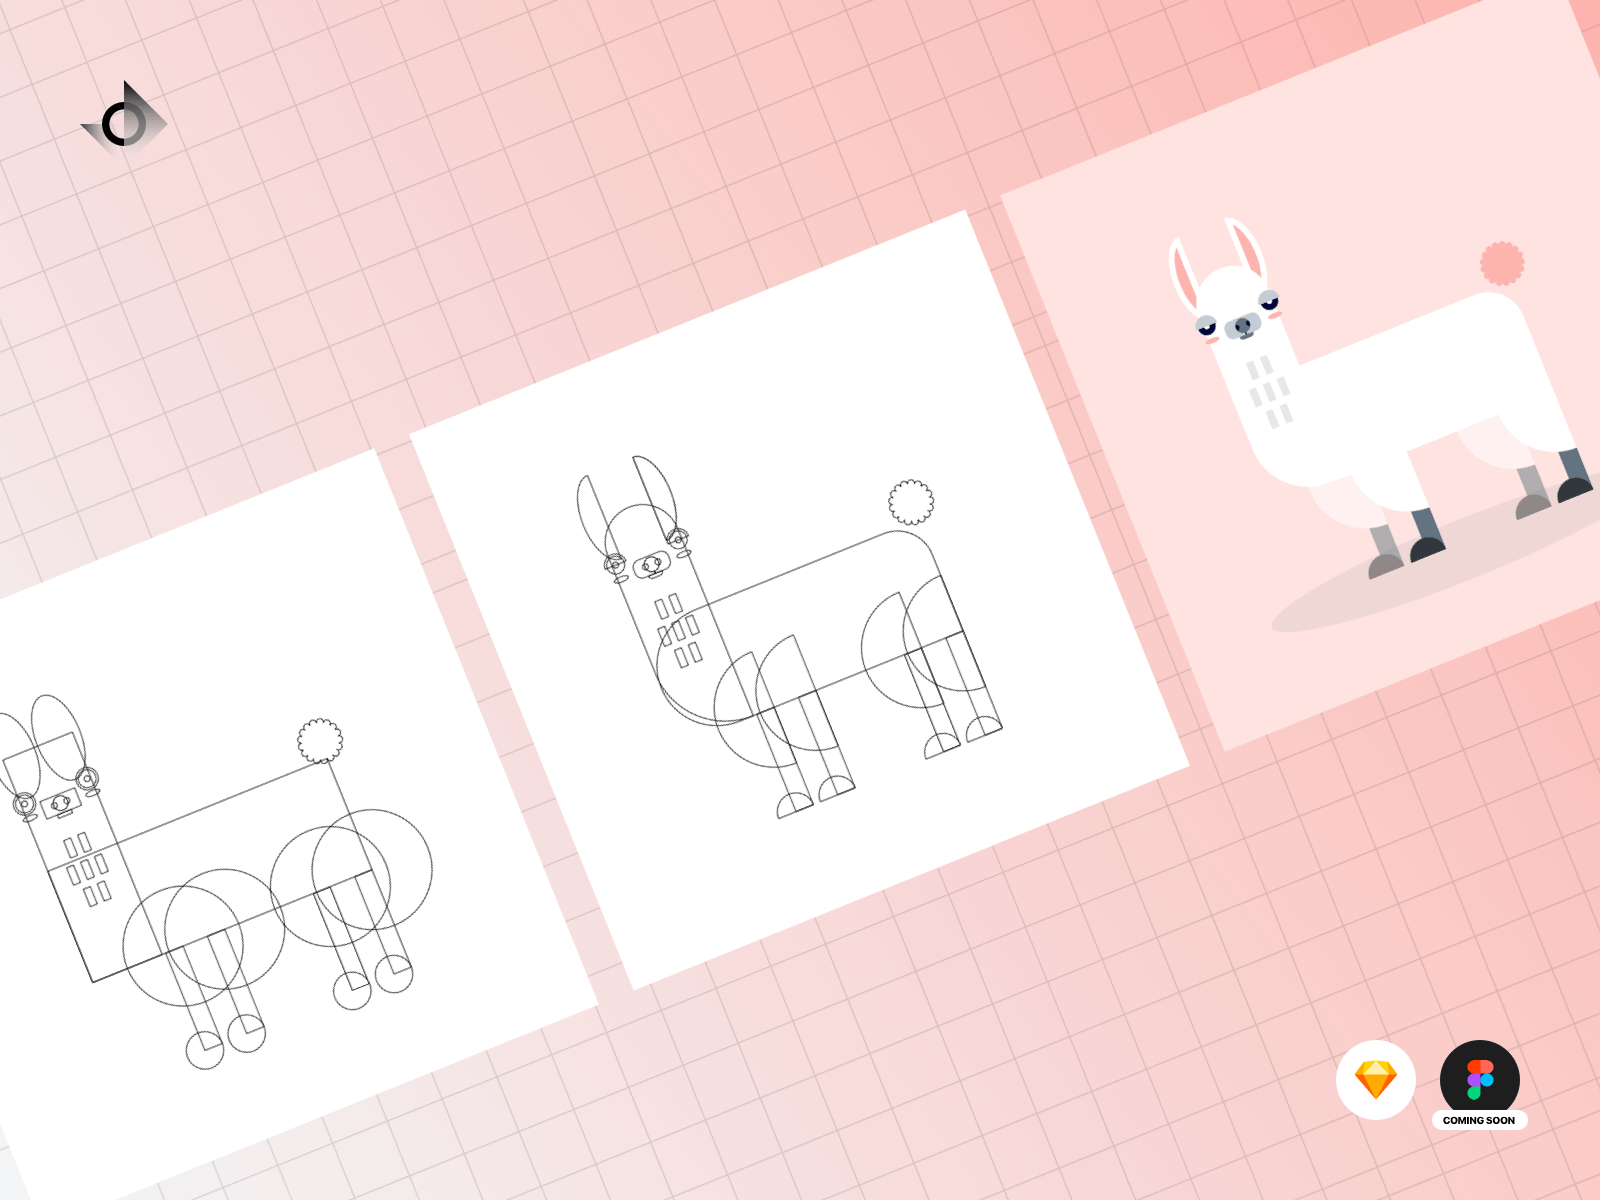 A geometric judgemental alpaca illustration tutorial showing a series of steps it took to achieve the final result.